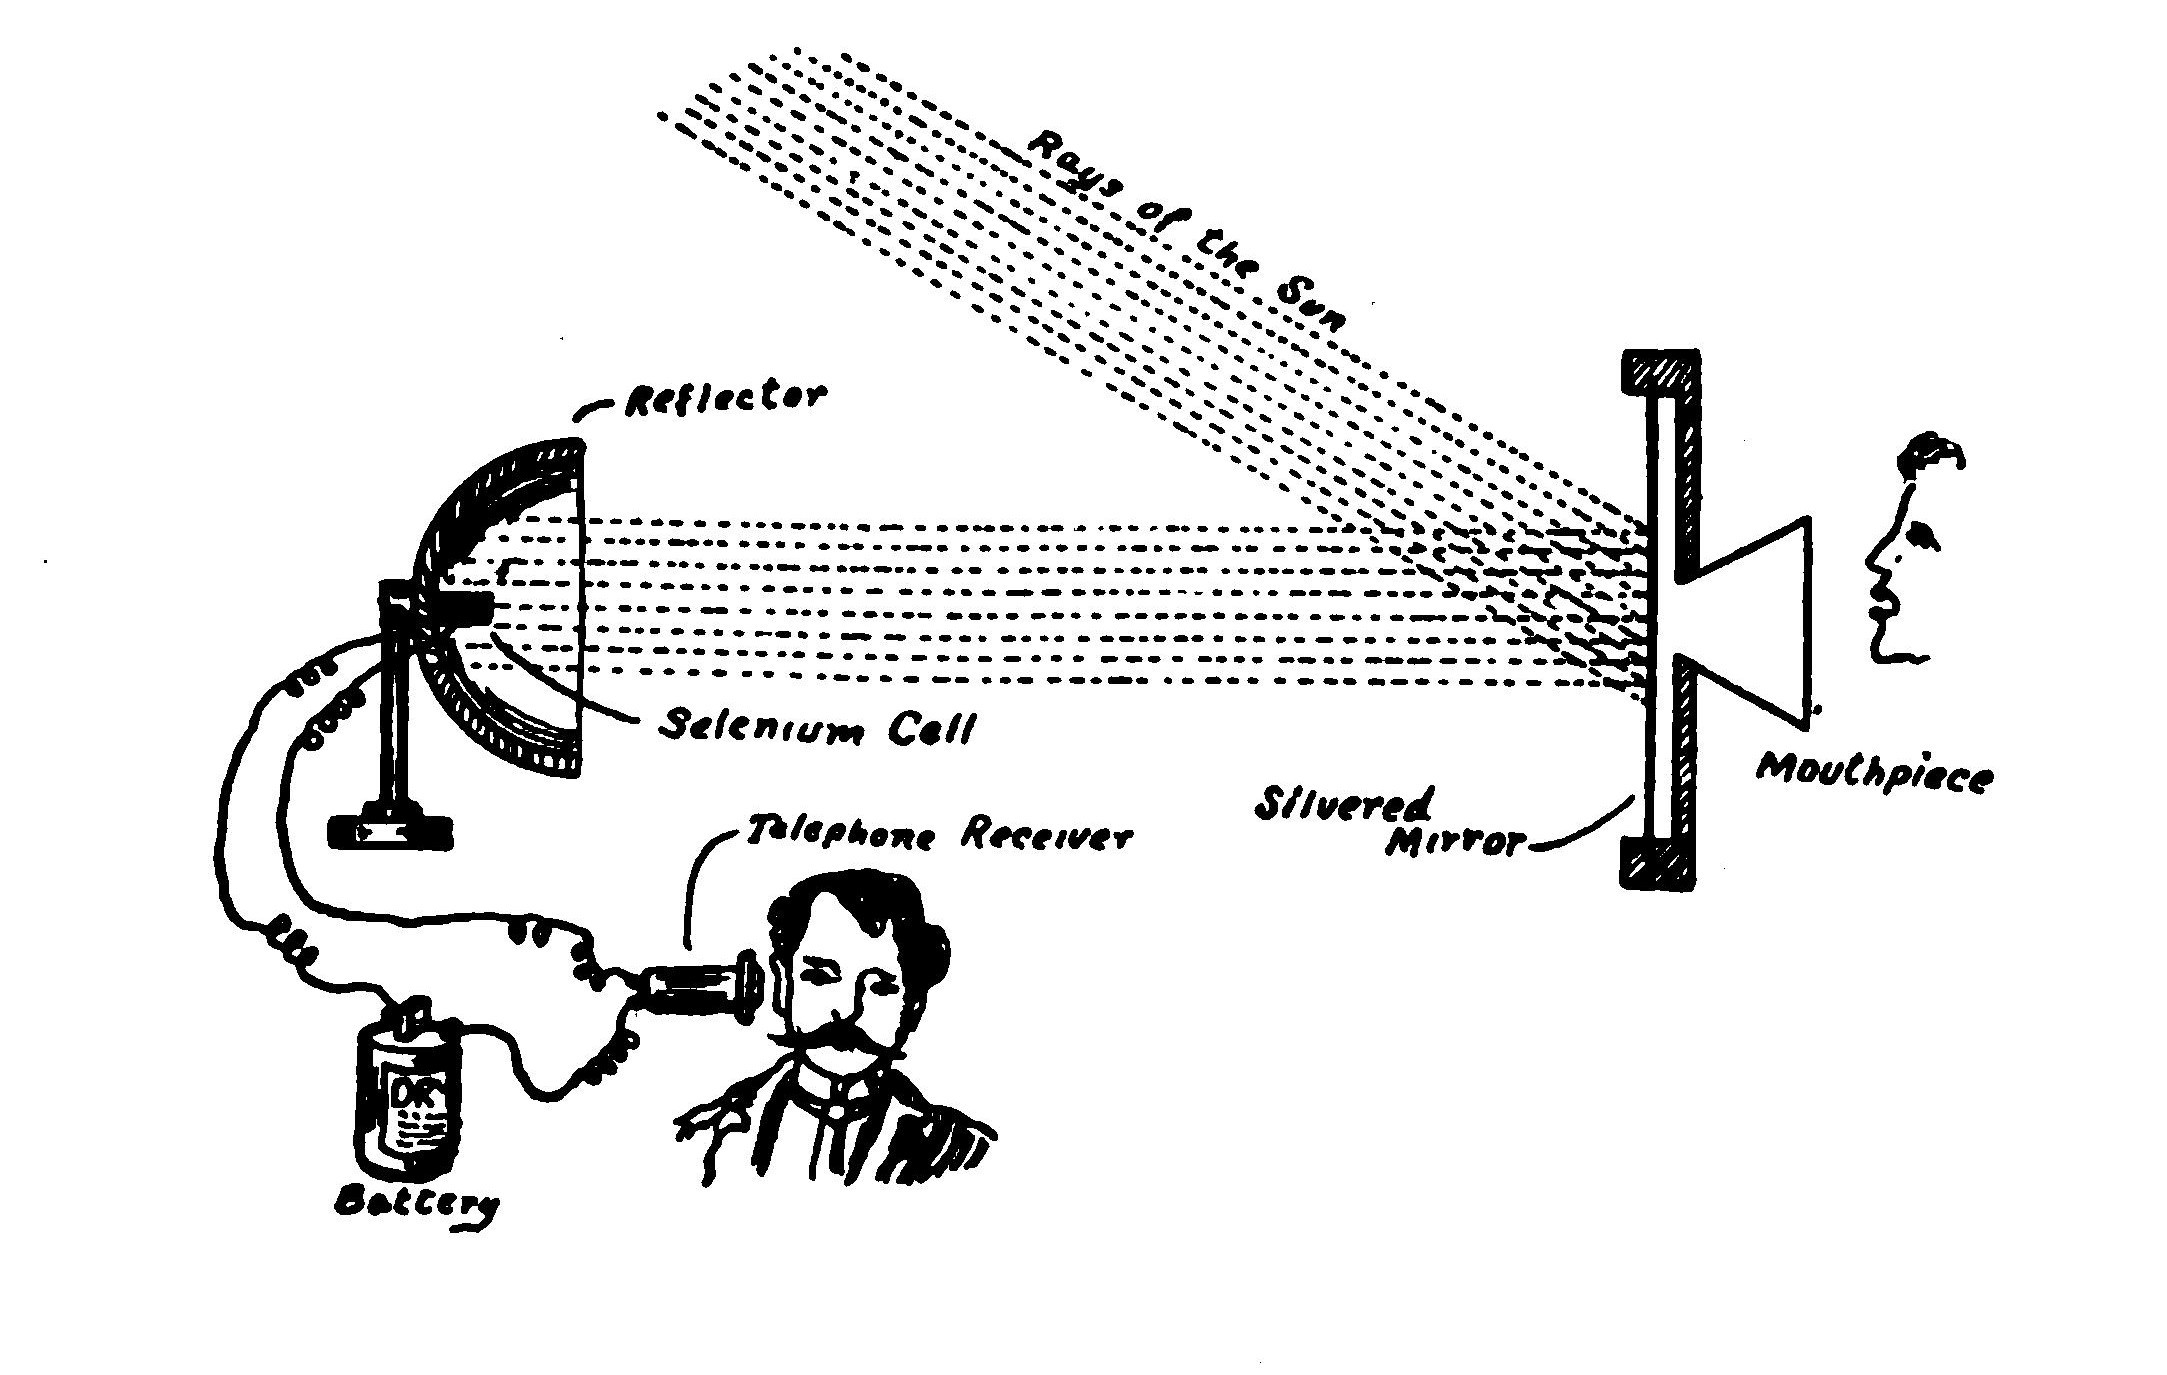 FIG. 133.—The photophone.